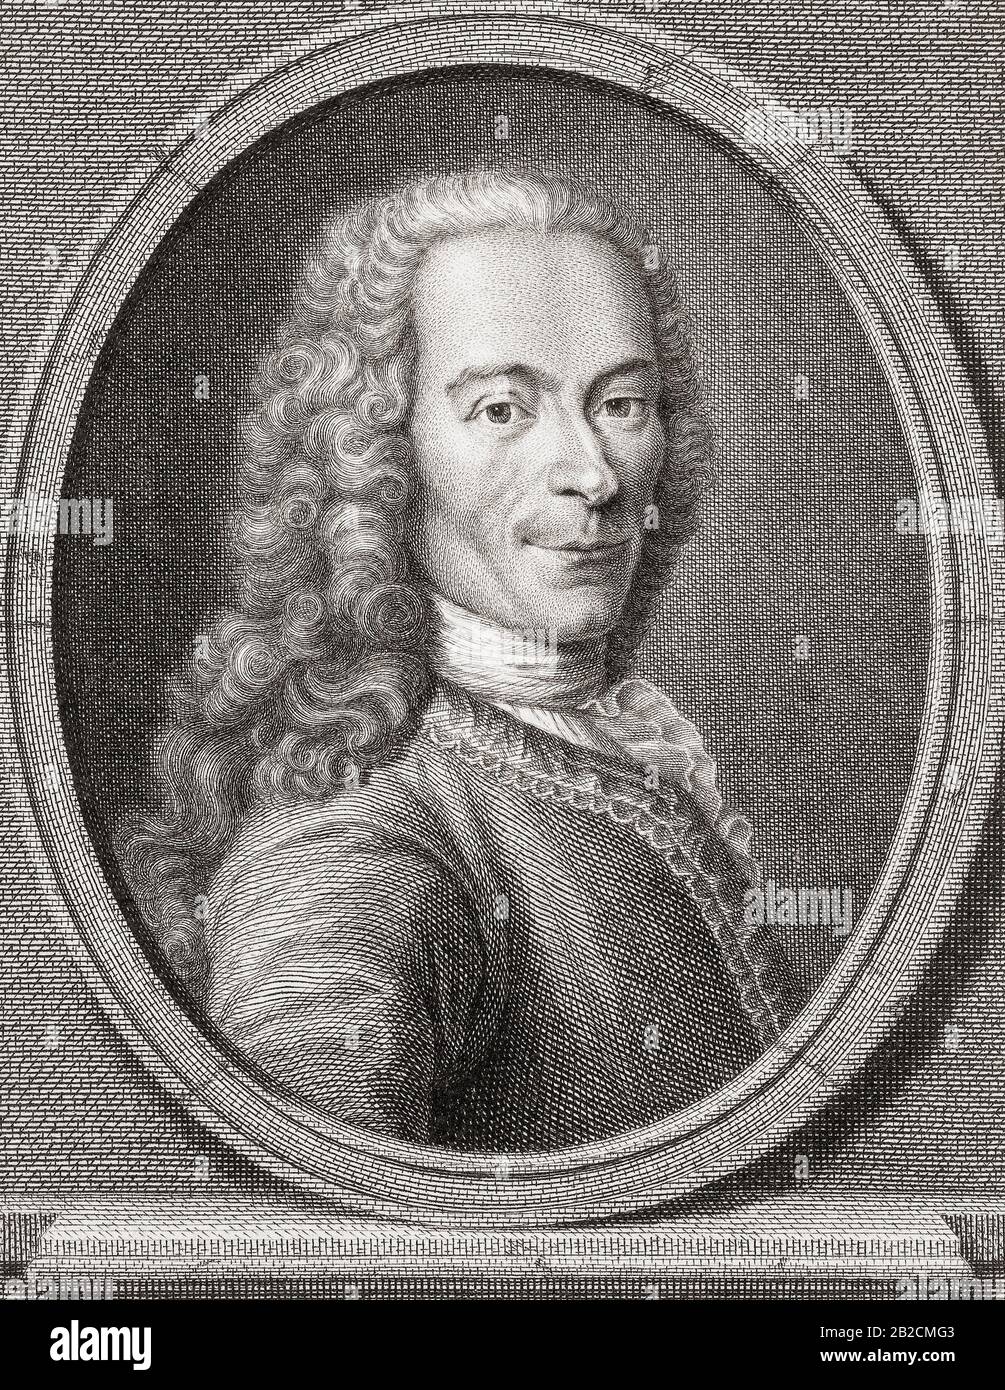 François-Marie Arouet, 1694 – 1778, best known by his nom de plume of Voltaire.  French Enlightenment writer, historian and philosopher. Stock Photo